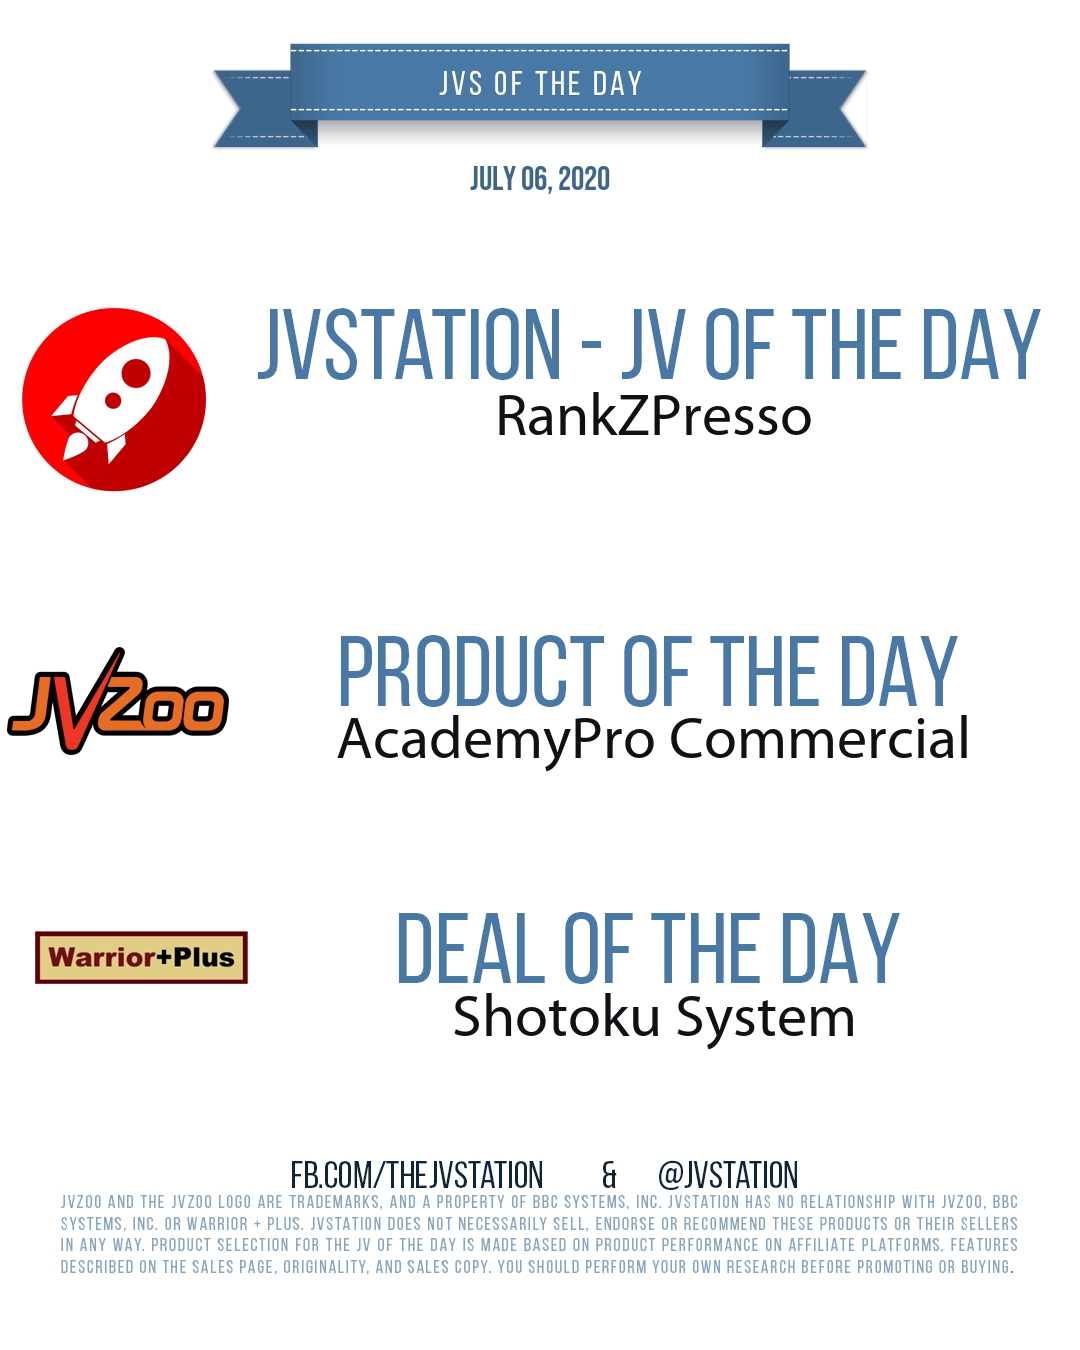 JVs of the day - July 06, 2020